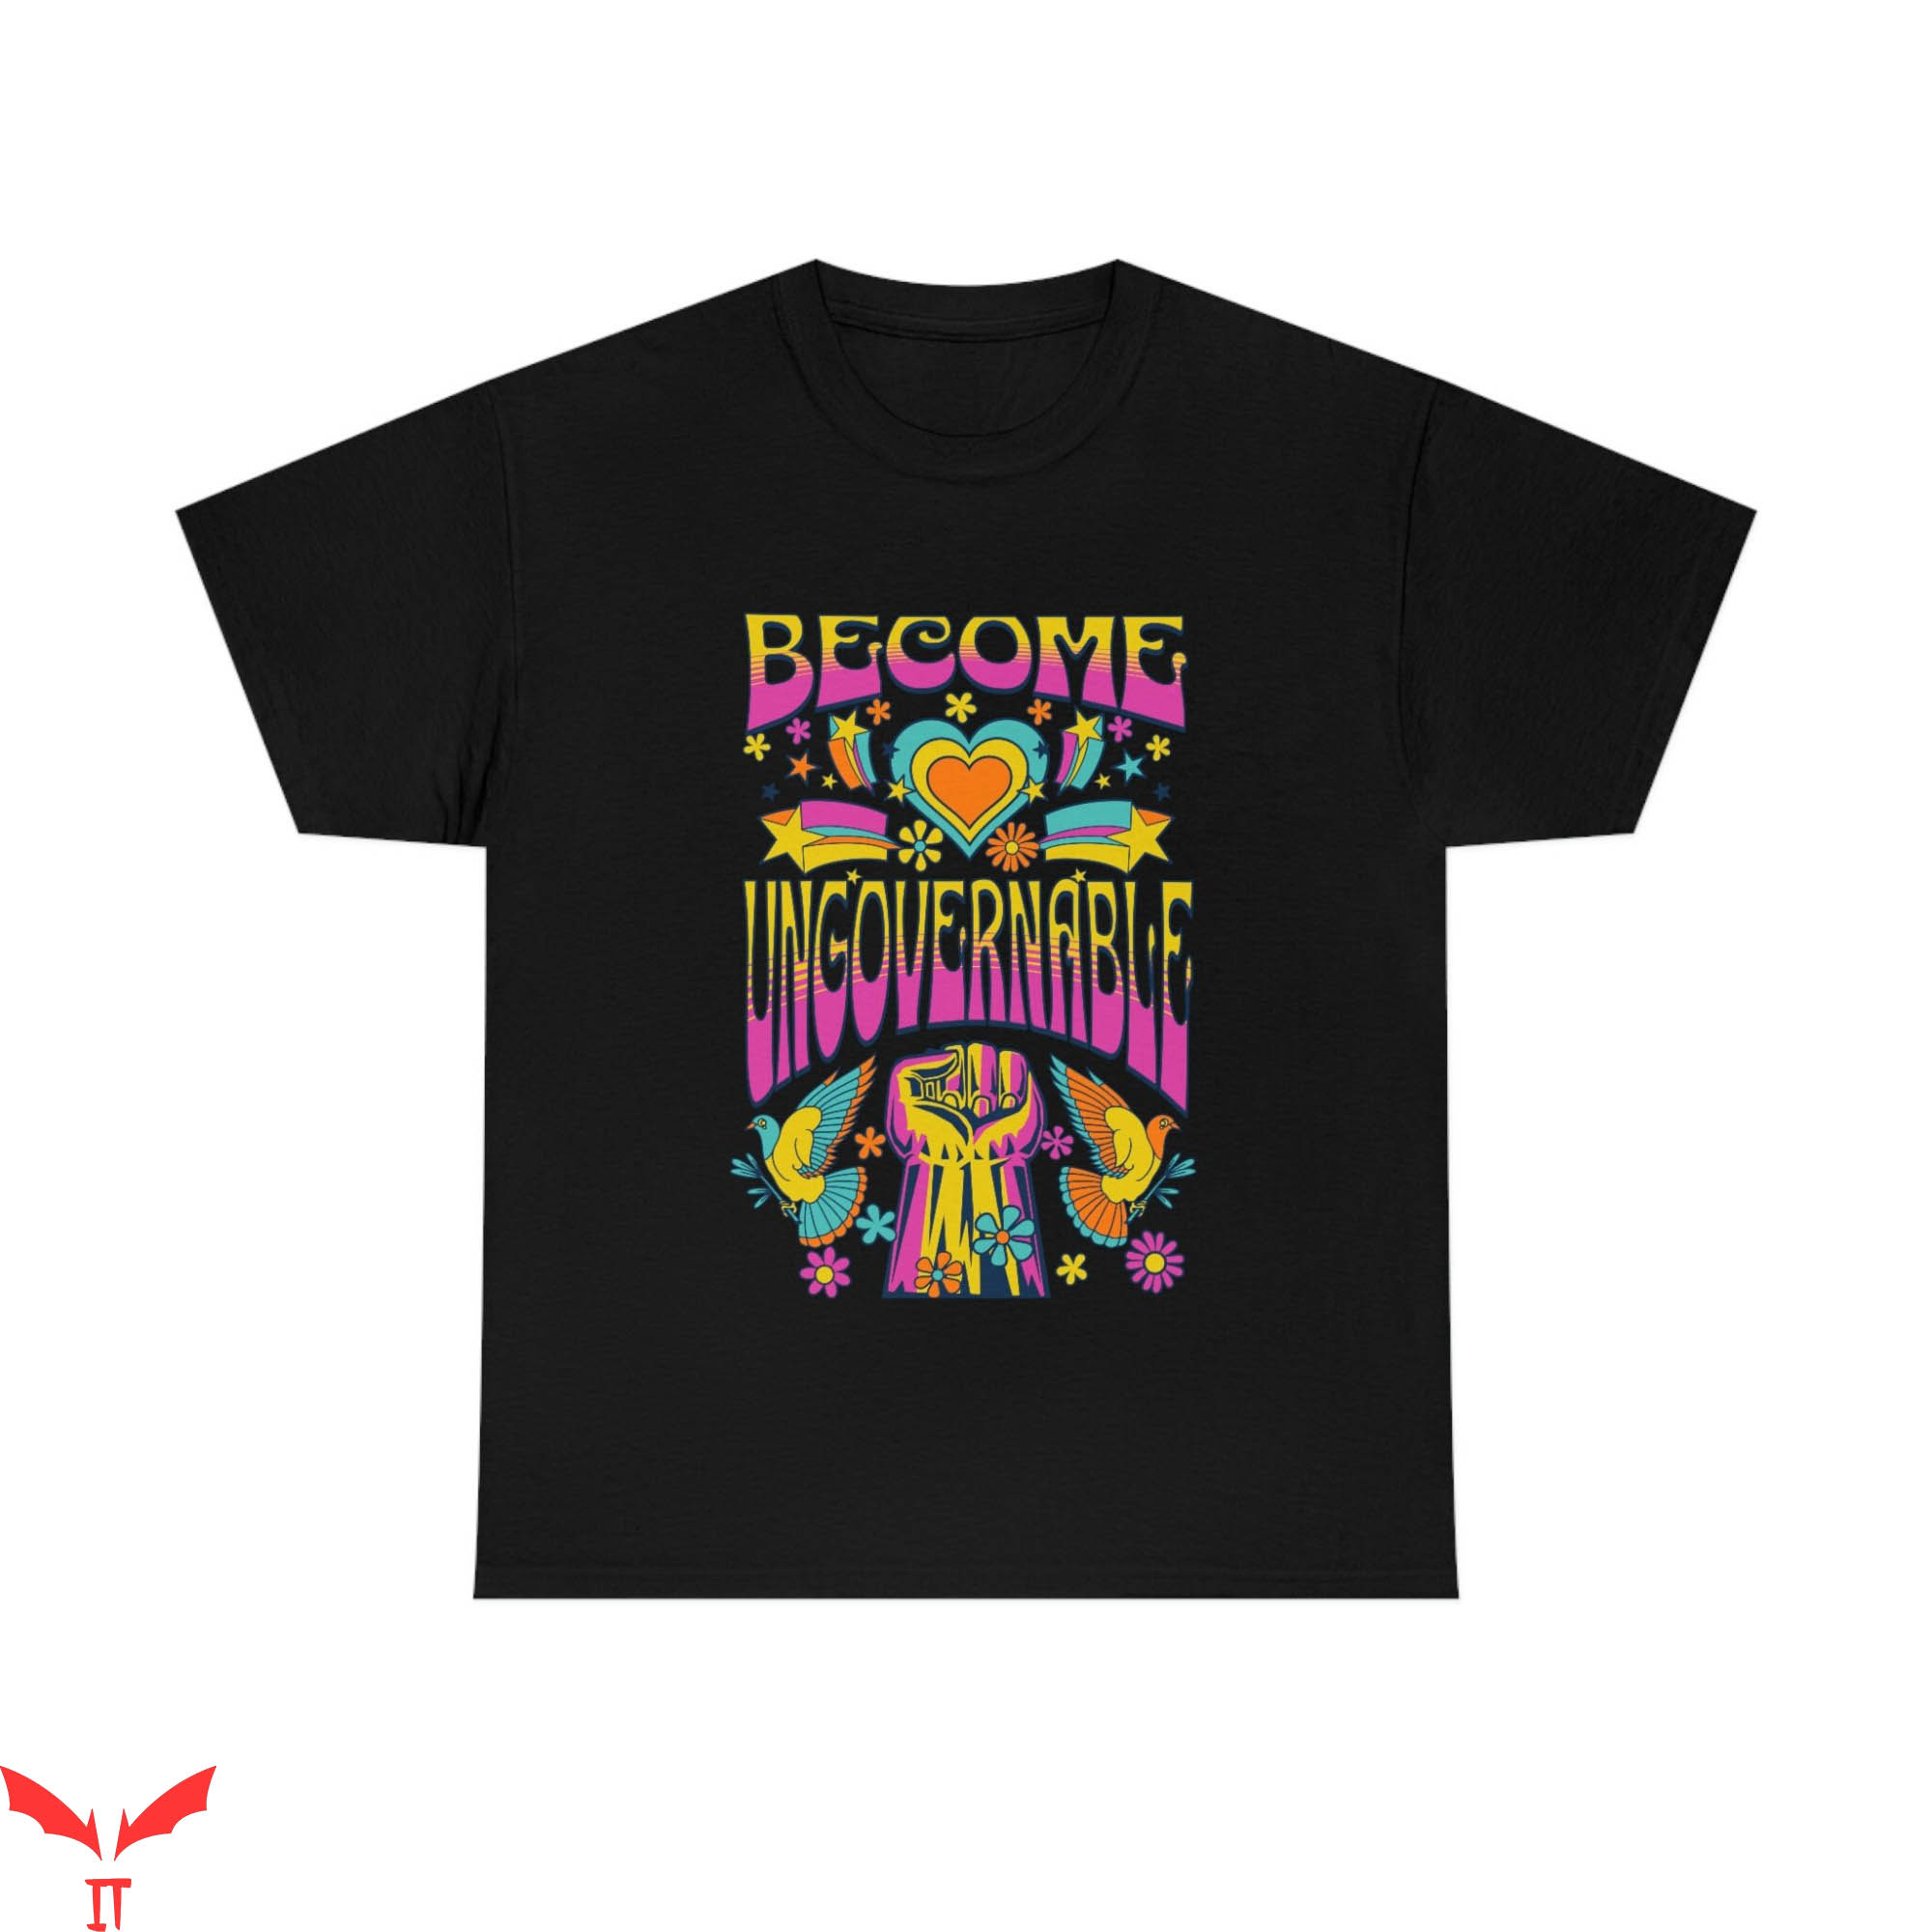 Become Ungovernable T-Shirt Anticapitalist Leftist Grunge